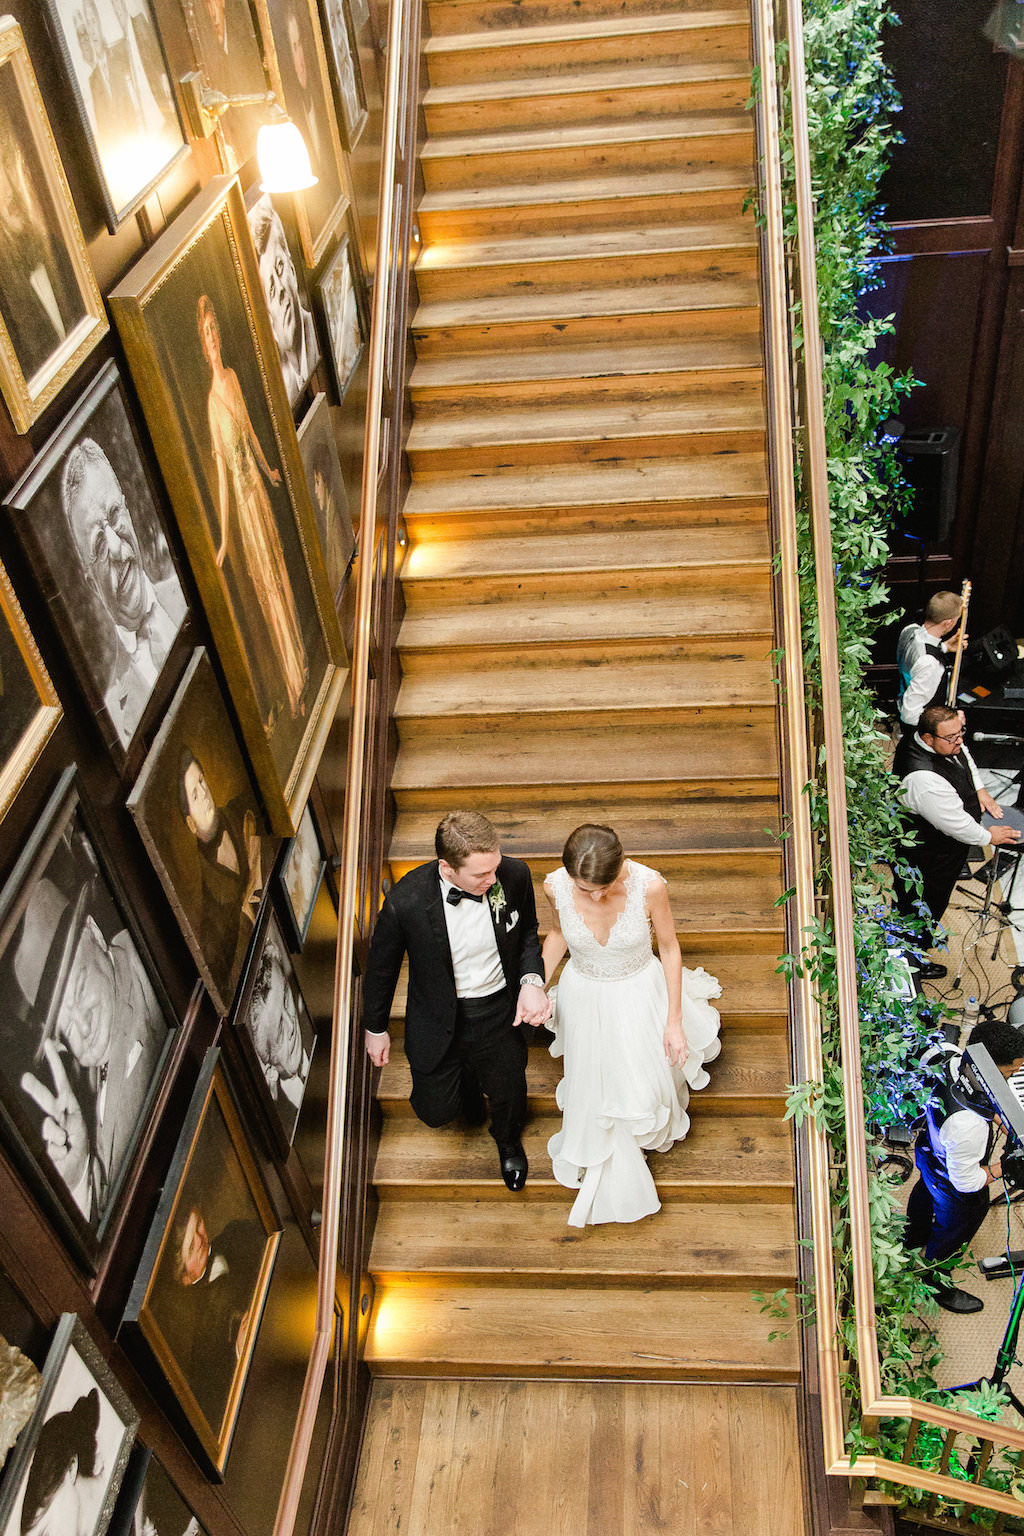 Indoor Wedding Portrait on Staircase, Bride in V Neck Lace Hayley Paige Dress, Groom in Black Tuxedo | Tampa Wedding Photographer Ailyn La Torre Photography | Downtown Historic Venue The Oxford Exchange